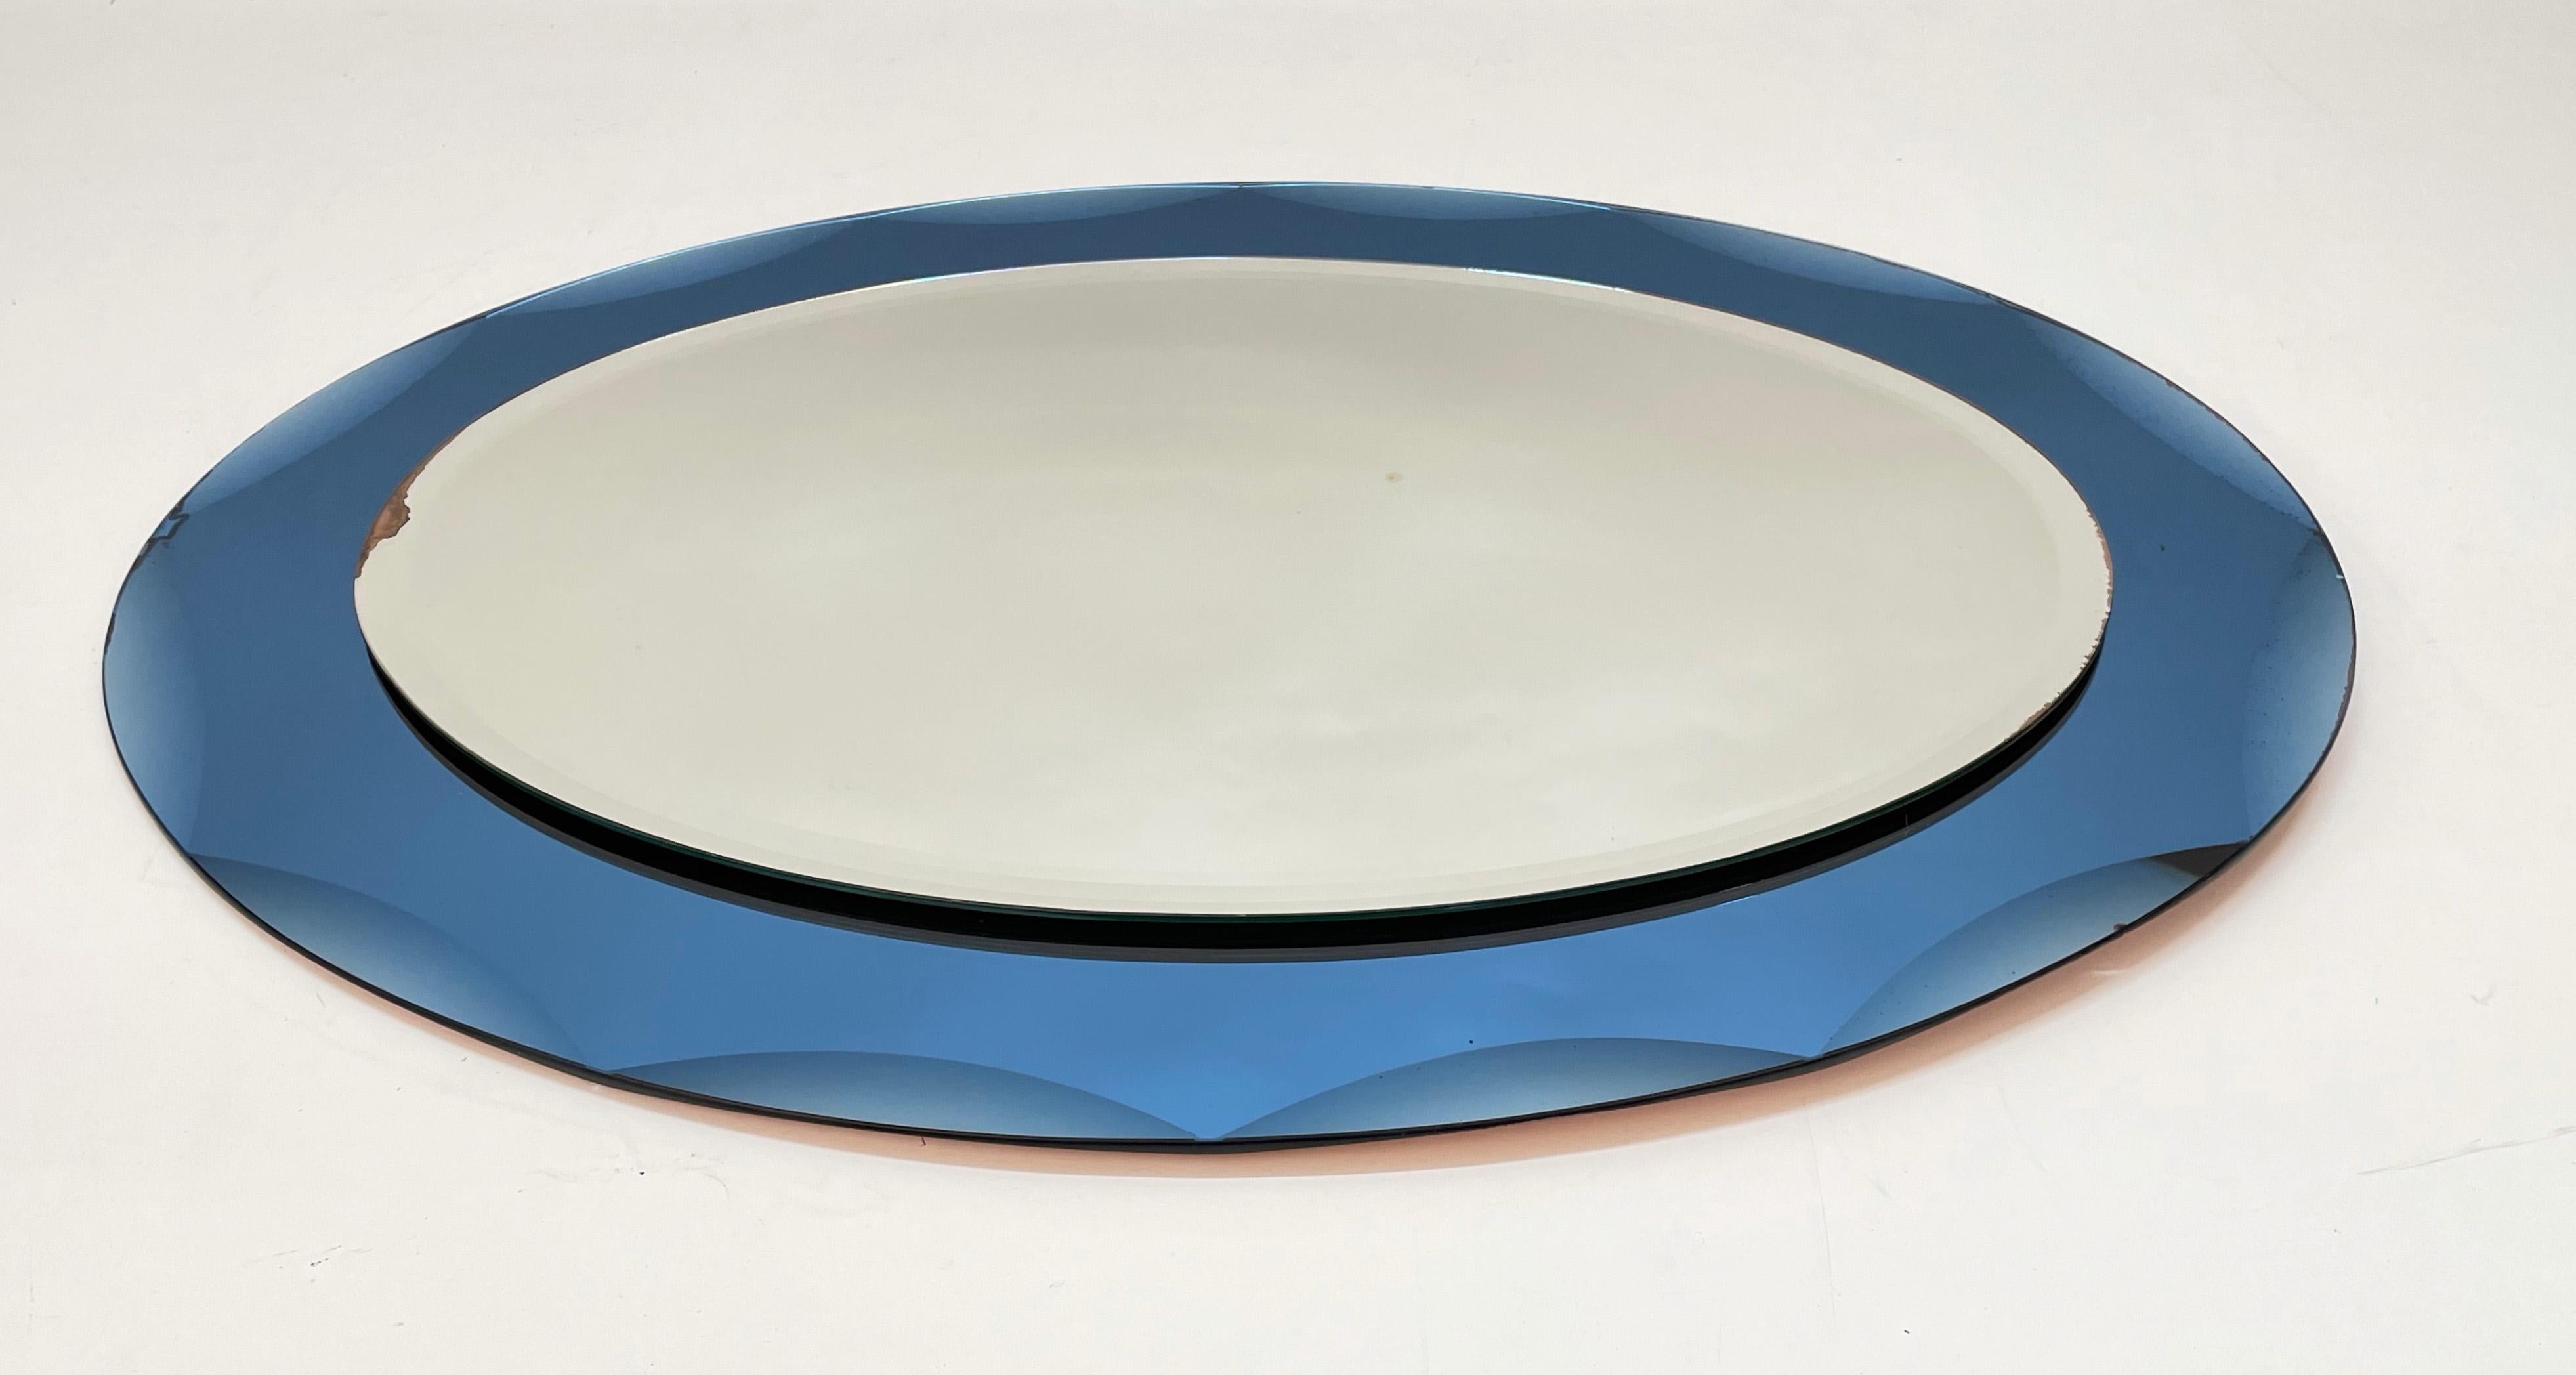 Midcentury Cristal Arte Italian Oval Mirror with Graven Blue Frame, 1960s For Sale 3